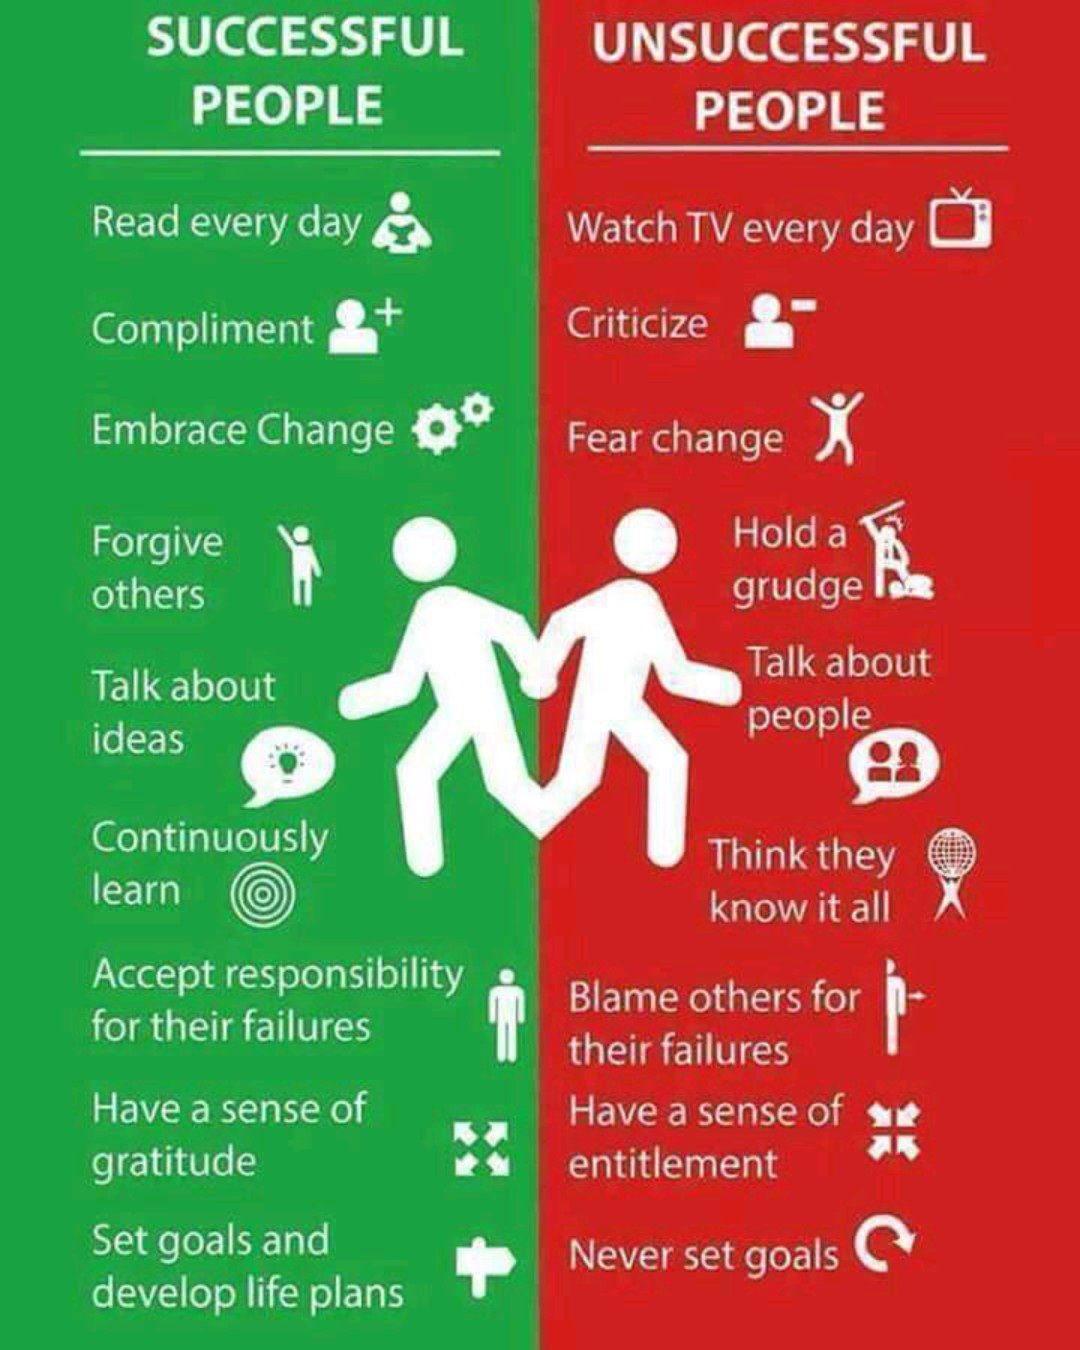 SUCCESSFUL UNSUCCESSFUL

PEOPLE PEOPLE
ACERT CE) PS Watch TV every day 3
Compliment at Criticize ga

[SplelEIdN@ Eel o° Fear change X

Forgive } » * 5h 4
others grudge

k
Talk about os a
[e[F1 [+ i es
Continuously sa
[ET know it all

Accept responsibility
for their failures [|

’

Blame others for I

their failures

Have a sense of Have a sense of «ae
; bod : FI

gratitude C2 LT Eat

Set goals and - Never set goals (&amp;
develop life plans